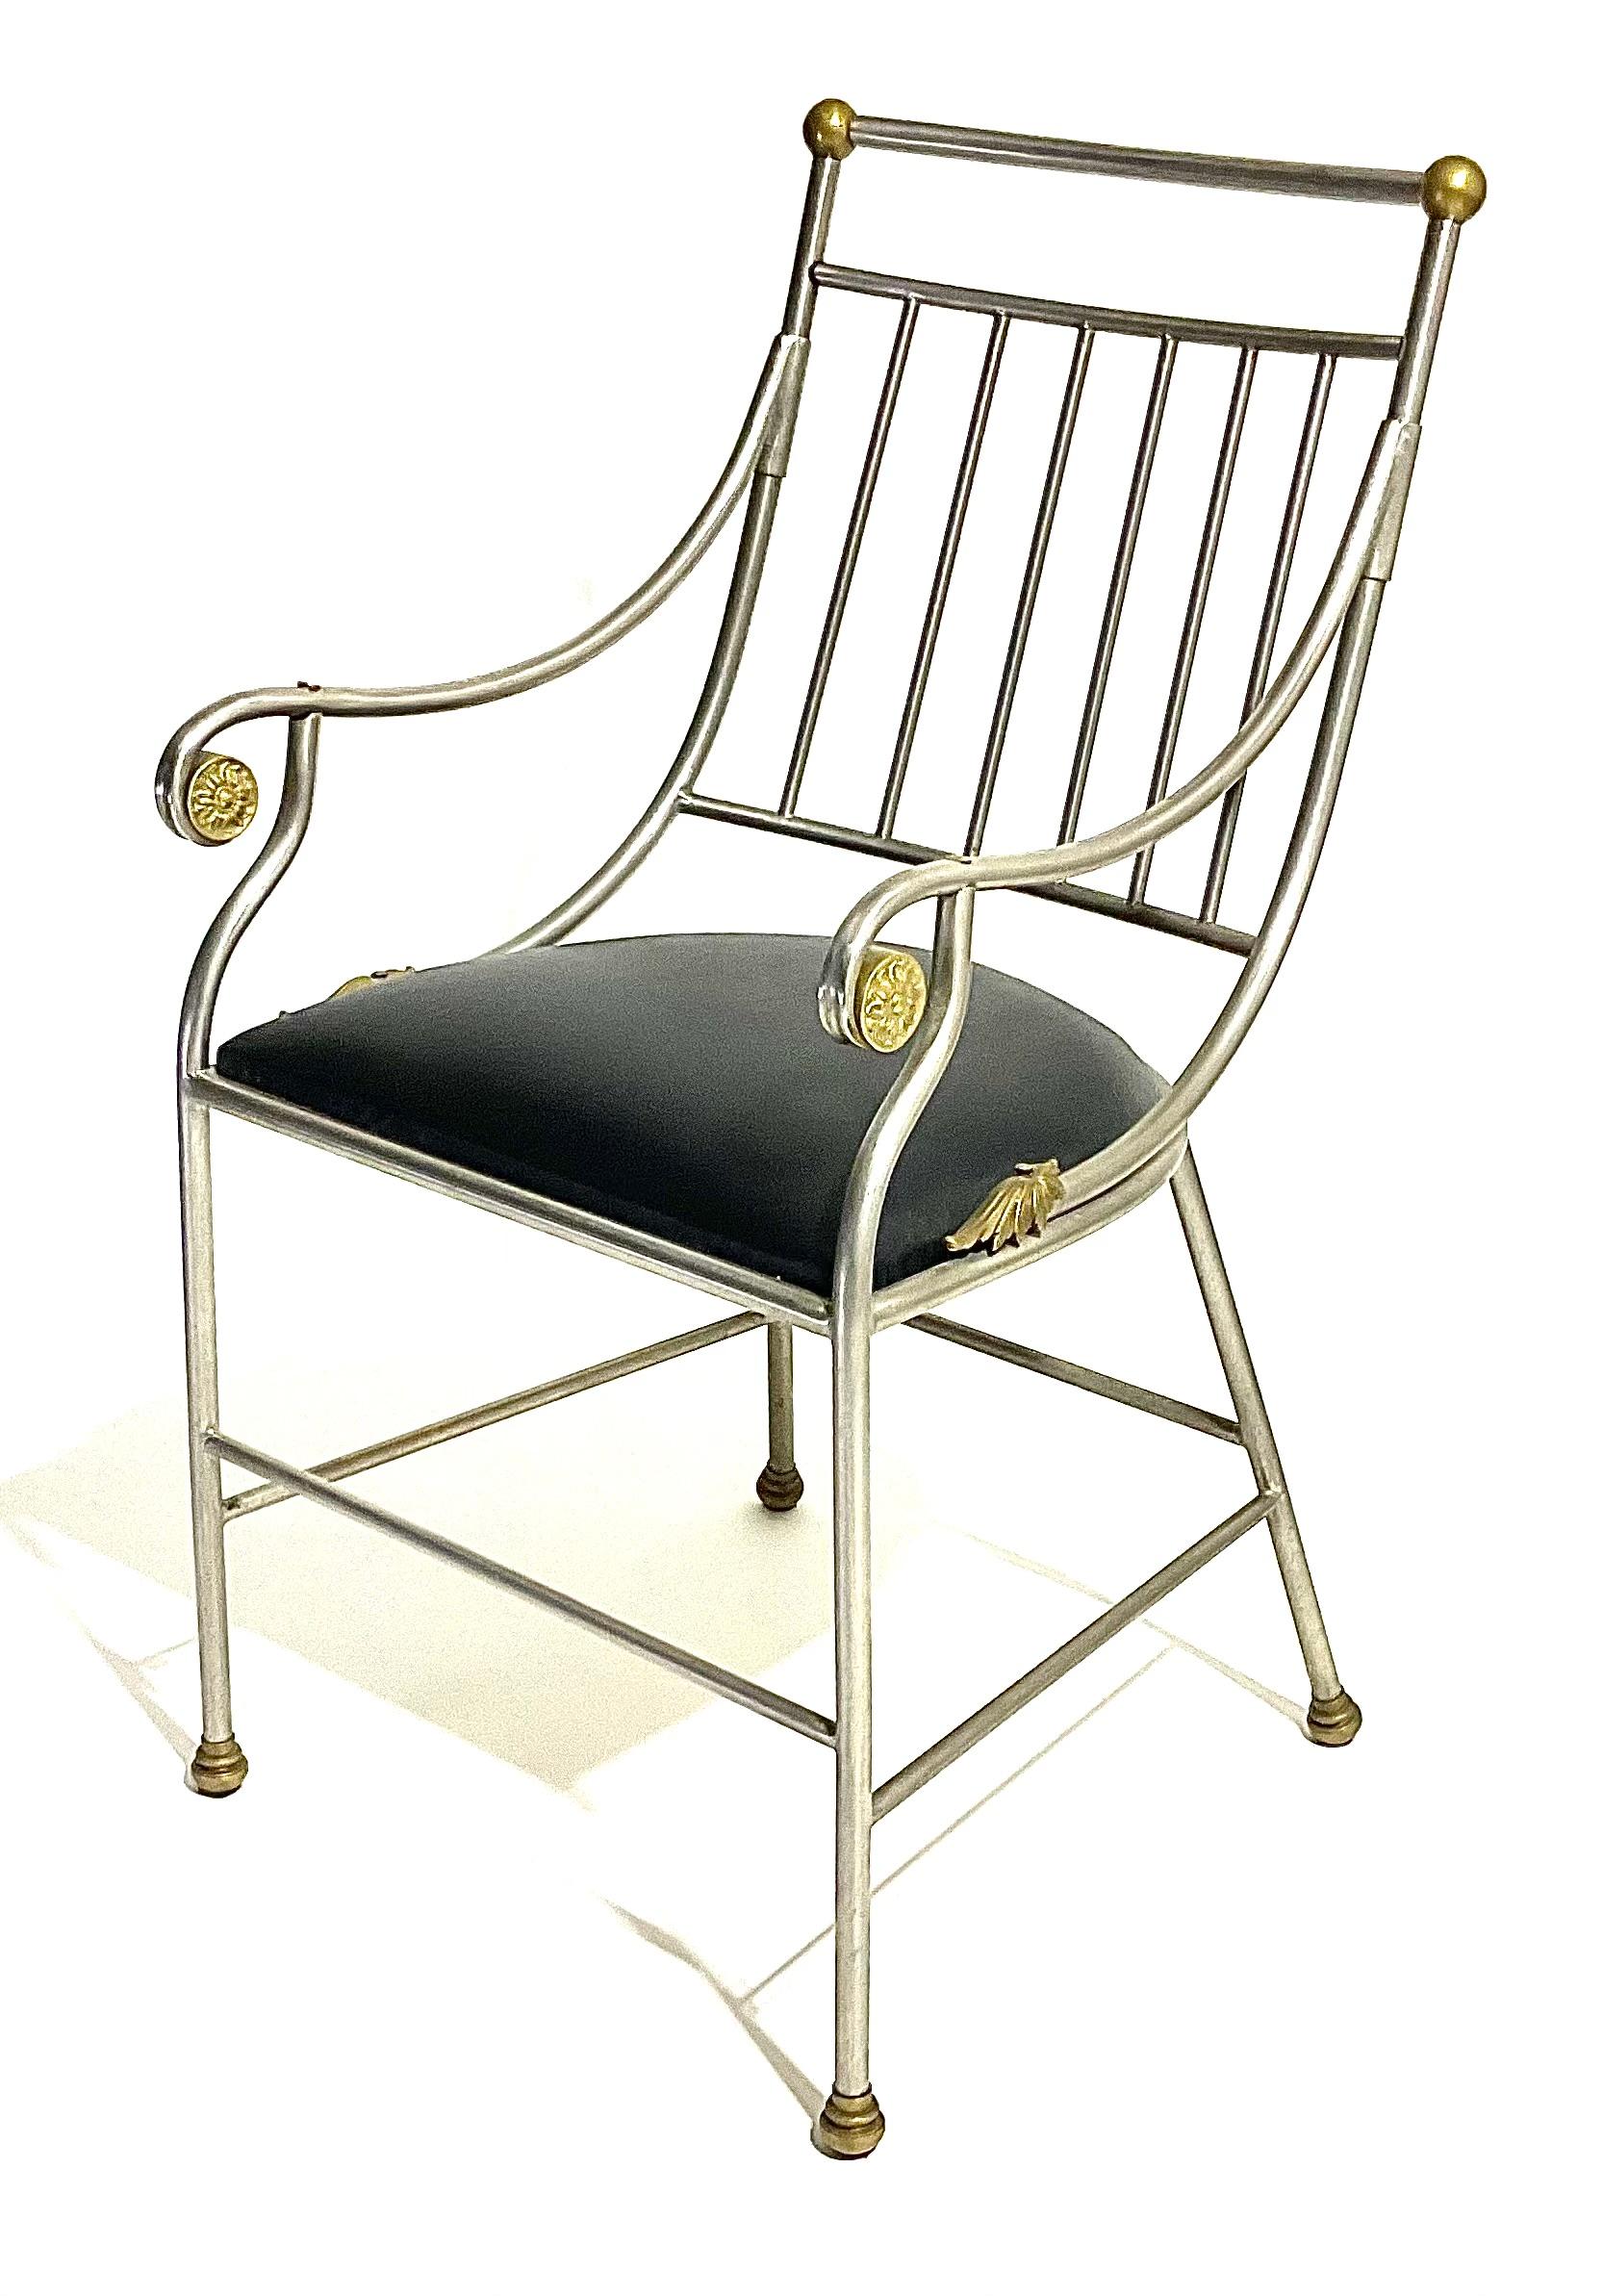 French Antique Art Deco Pair of Steel chairs with gilt decoration highlights In gold. Spectacular pair of chairs. We have another pair listed if you need 4. 